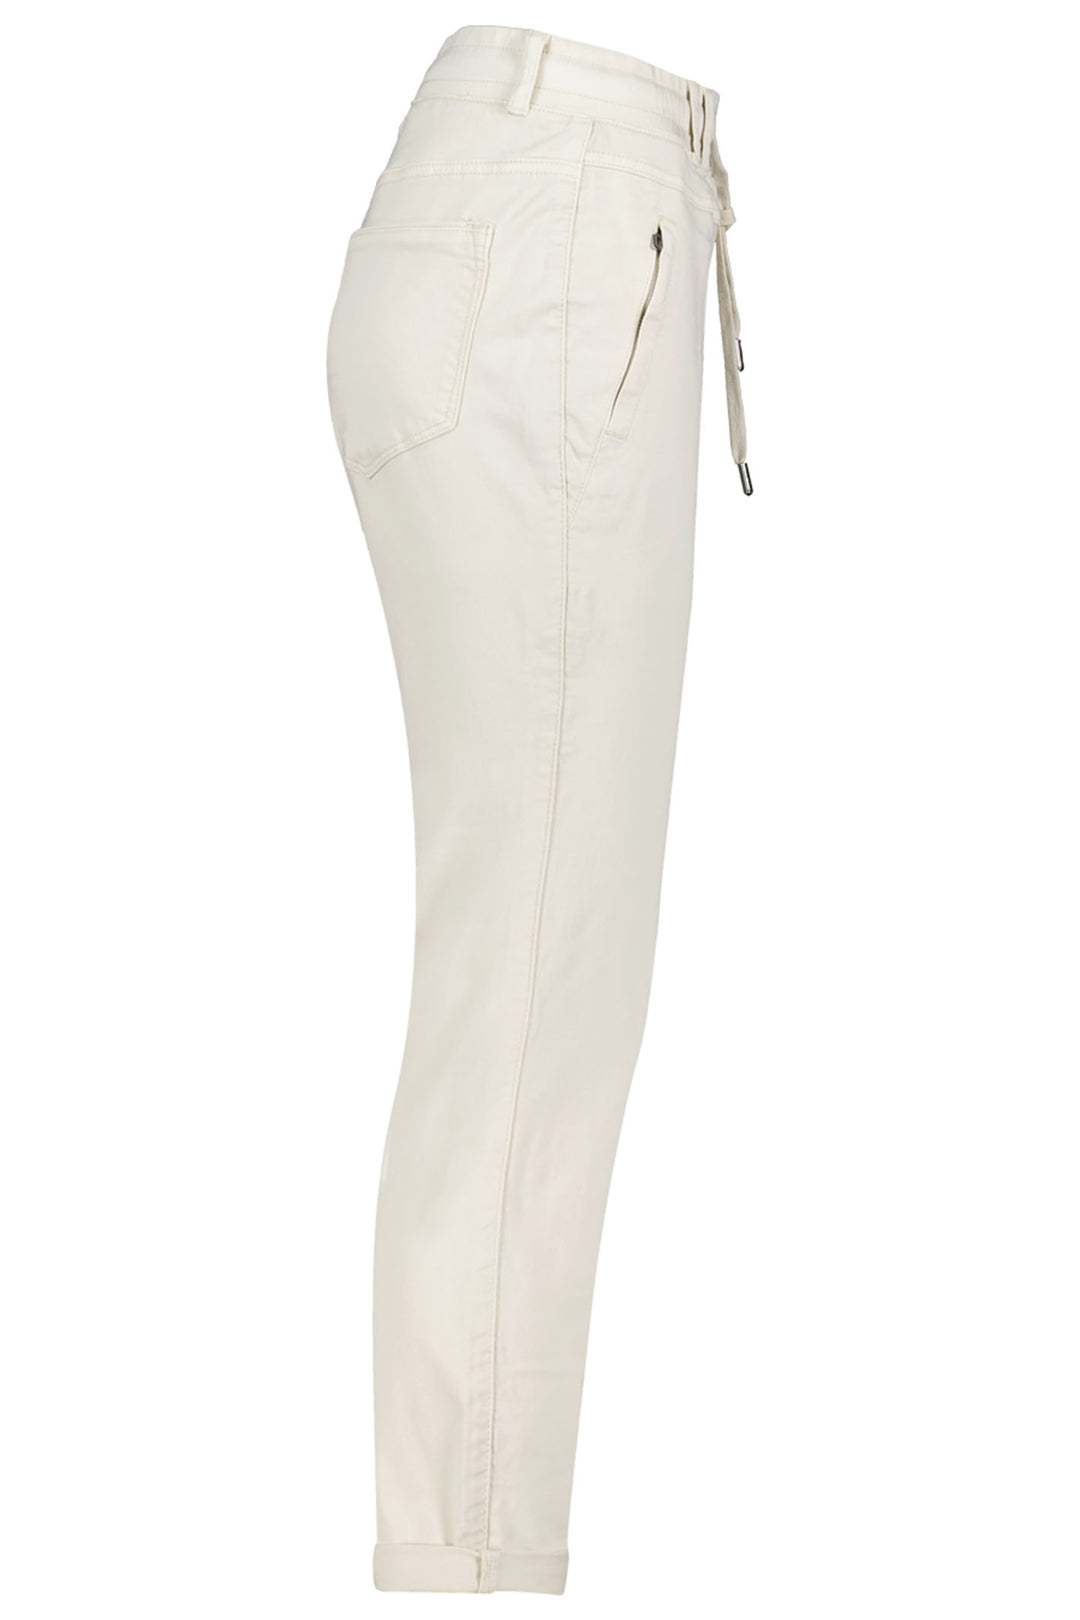 Red Button SRB4154 Pearl Cream Tessy Jogger Trousers 74cm - Olivia Grace Fashion